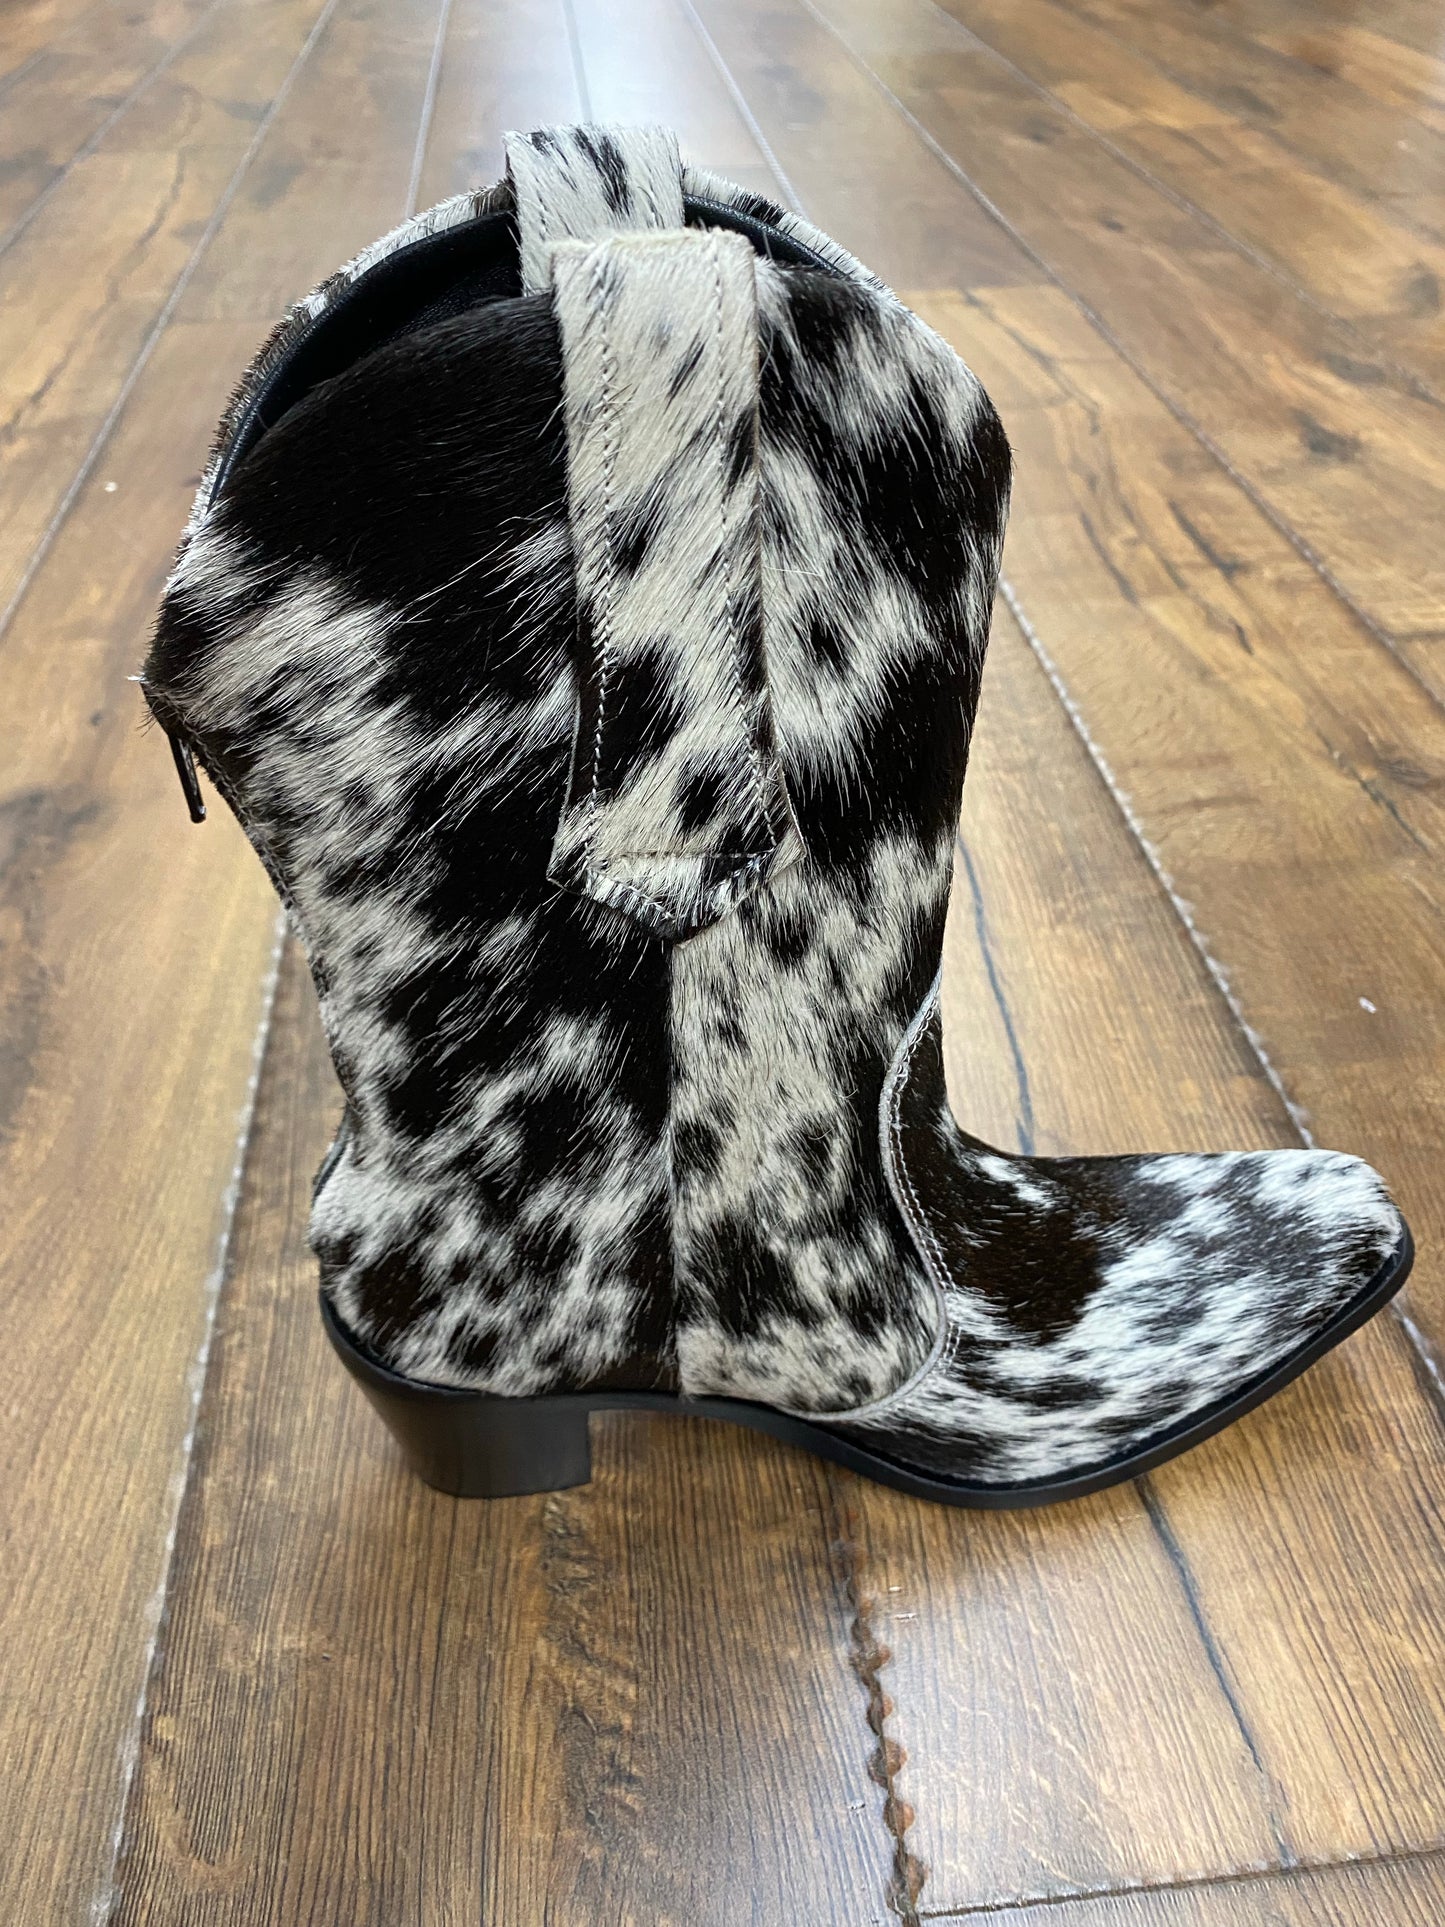 Agave sky salt and pepper hide on hair mid-calf made in Mexico boots